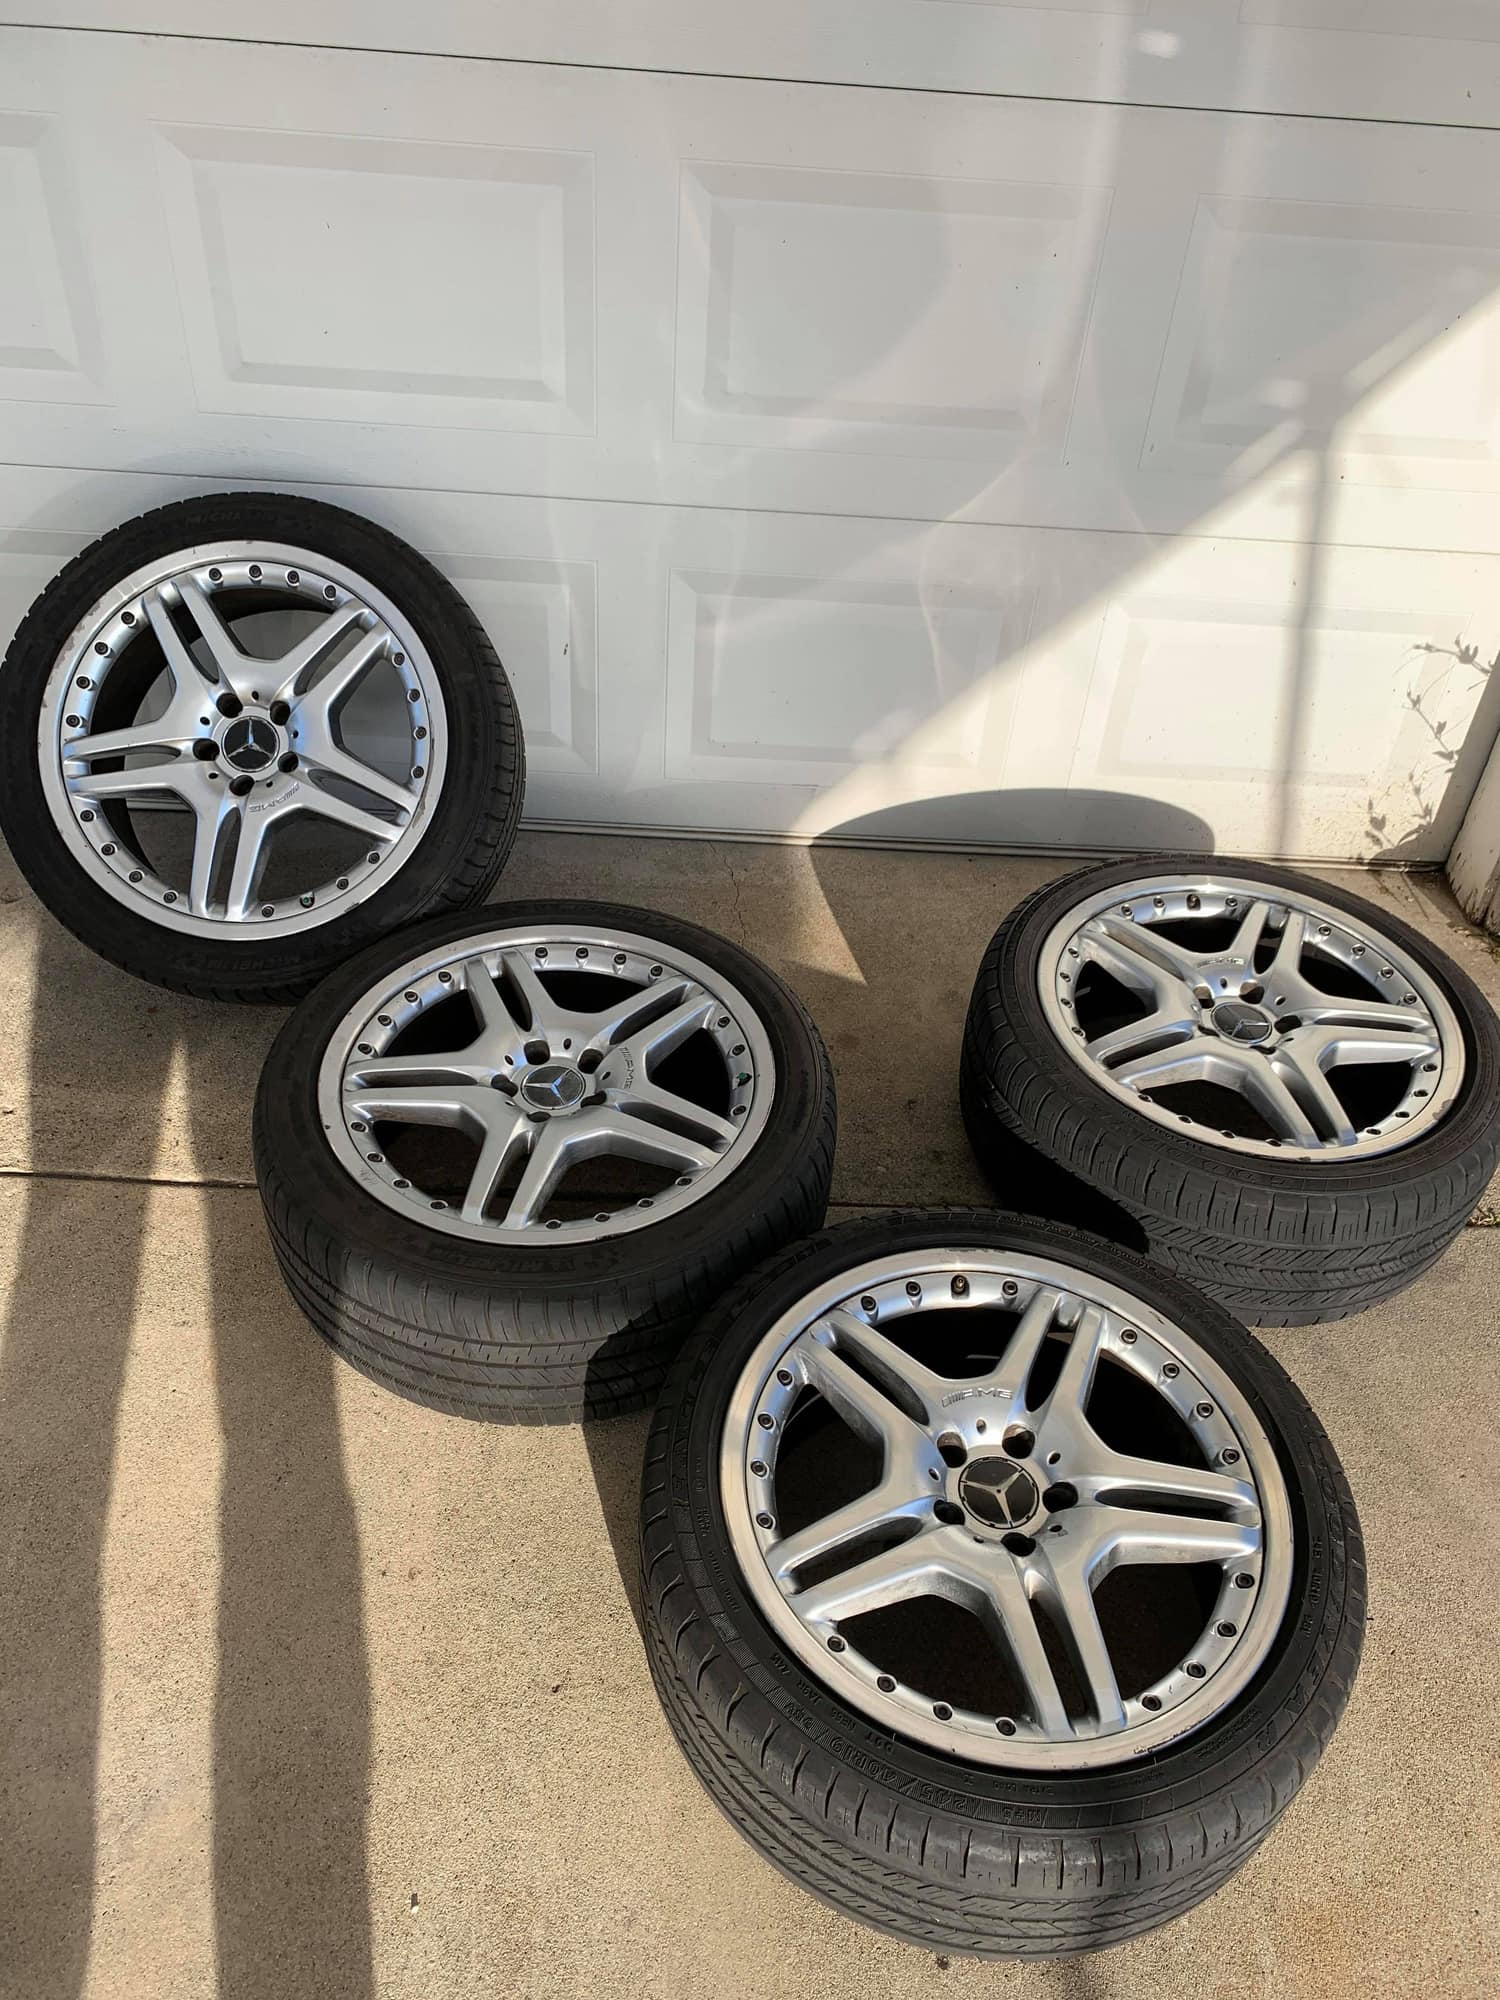 Wheels and Tires/Axles - 19x8.5 2 piece amg wheels and tires $1000 - Used - Gardena, CA 90247, United States